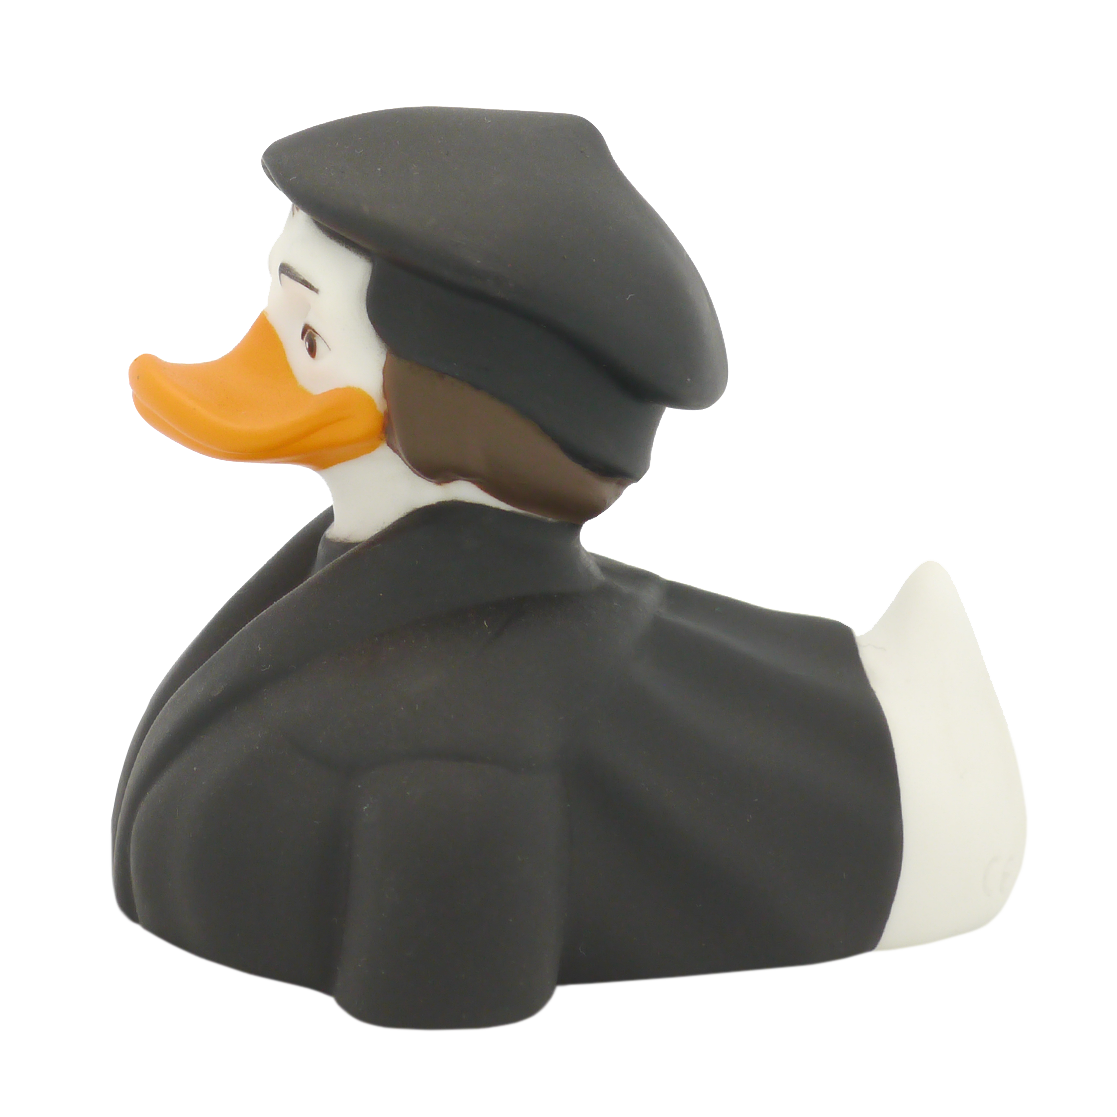 Duck Martin Luther.